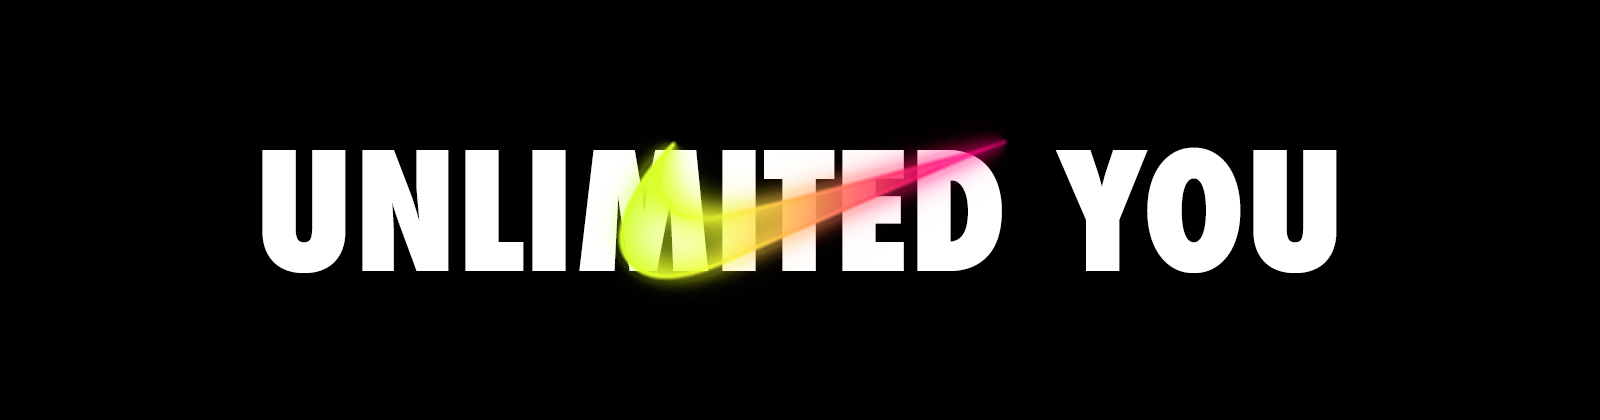 Nike presents Unlimited a ground-breaking, high-intensity workout experience heart of East London